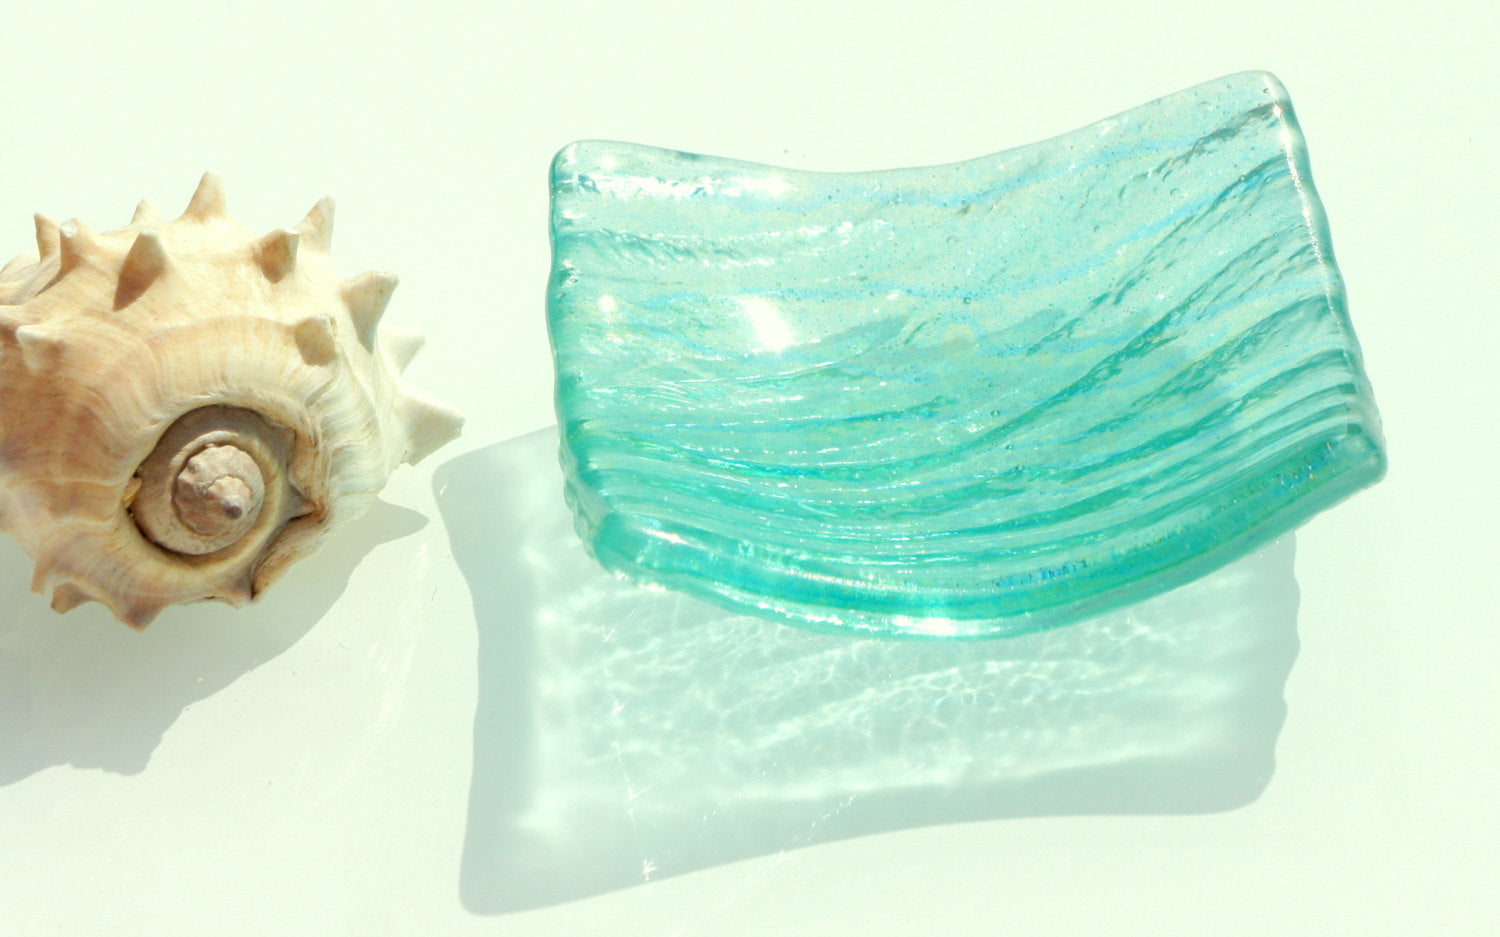 Turquoise Seabed Glass Dish 10cm(4")